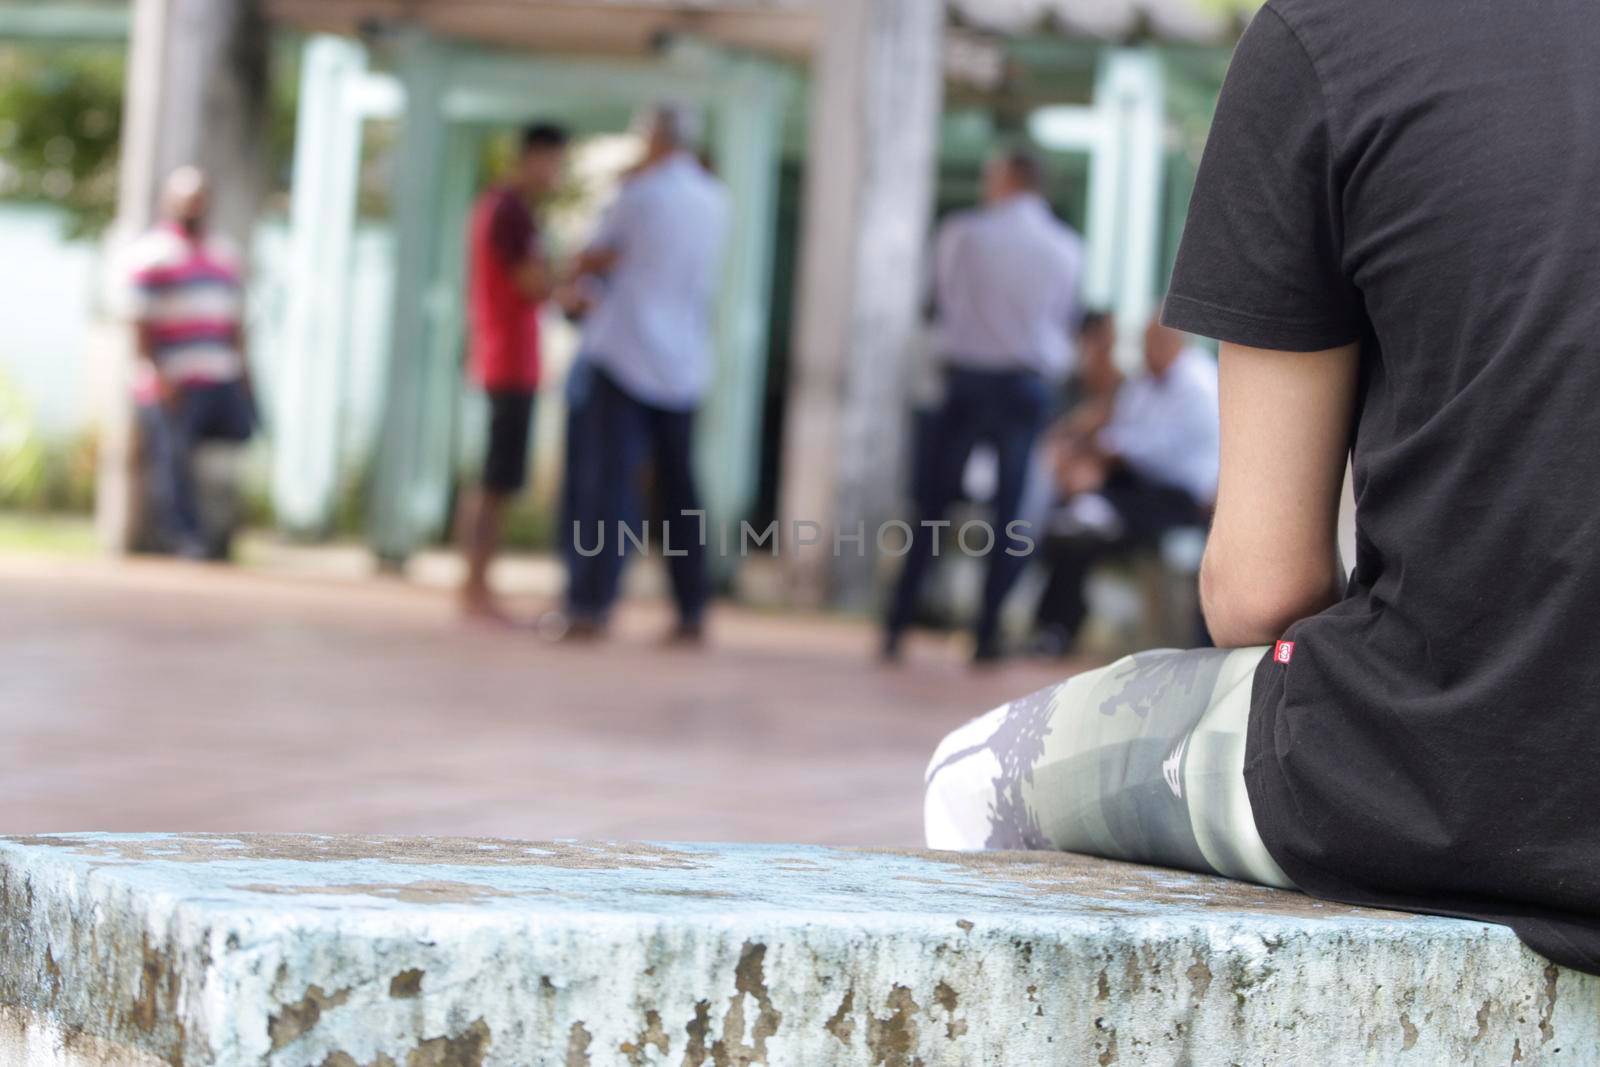 salvador, bahia / brazil - august 6, 2015: Adolescent offender, intern of the Community of Social and Educational Care (Case) is seen in the institution in the city of Salvador.